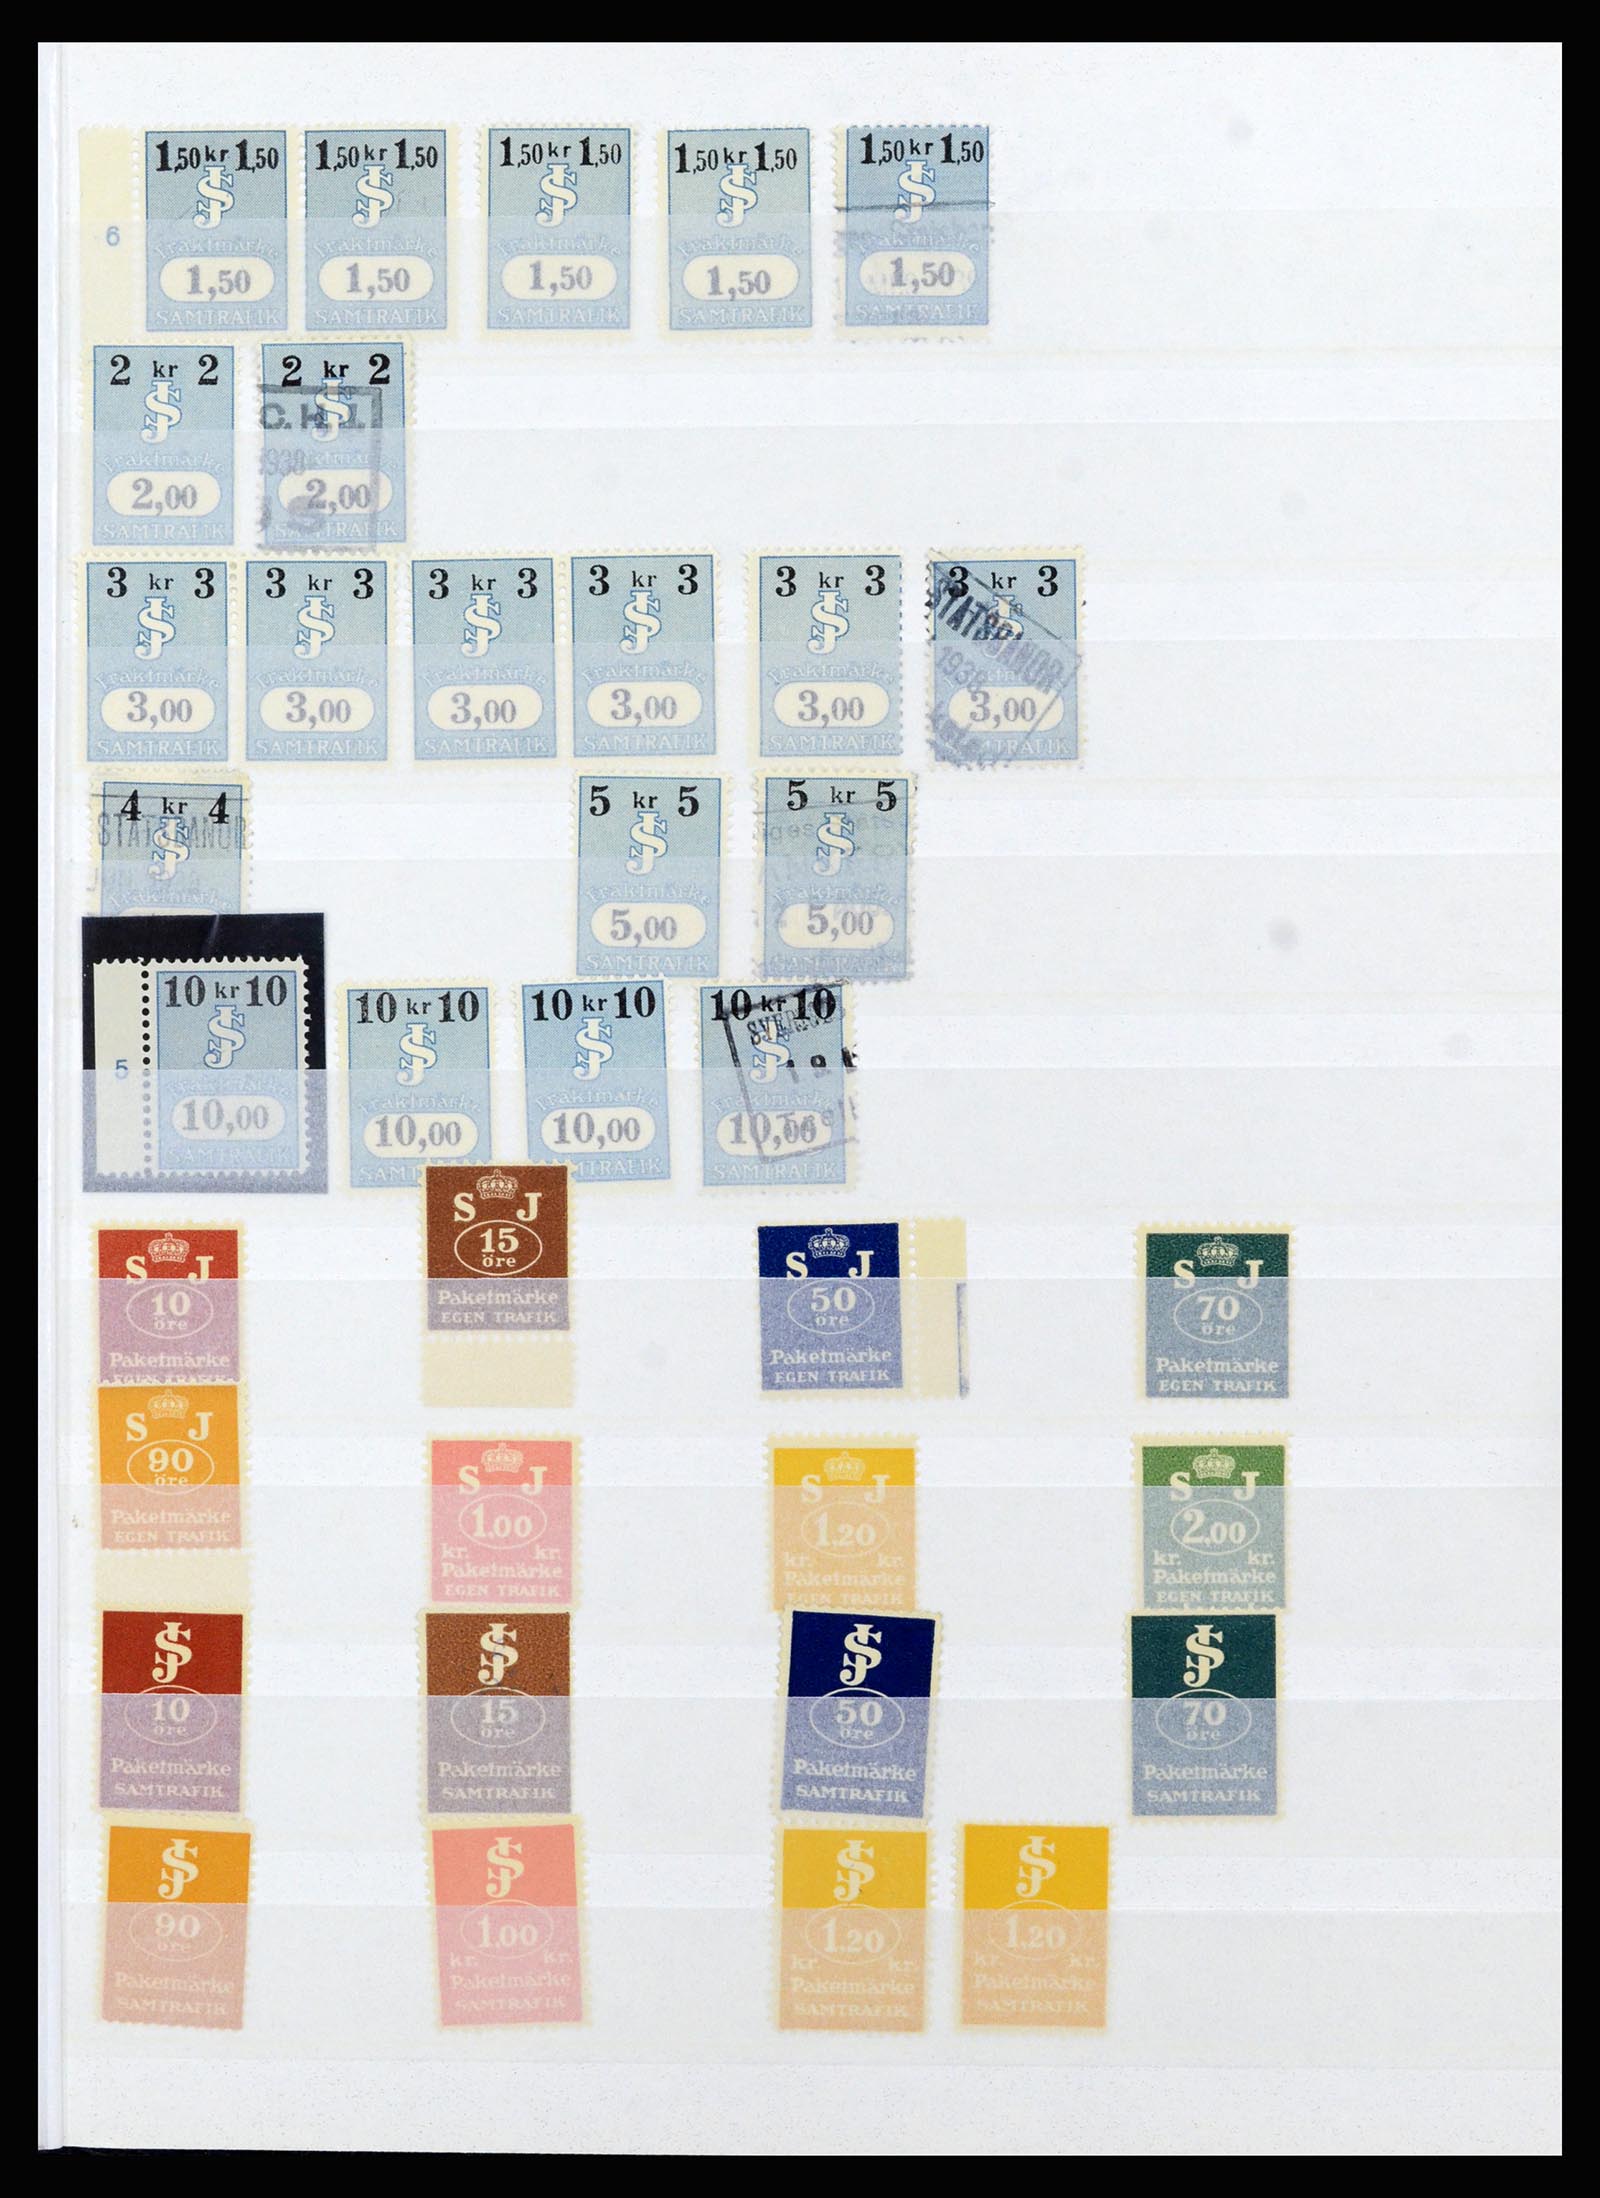 36981 017 - Stamp collection 36981 Scandinavia railroadstamps.